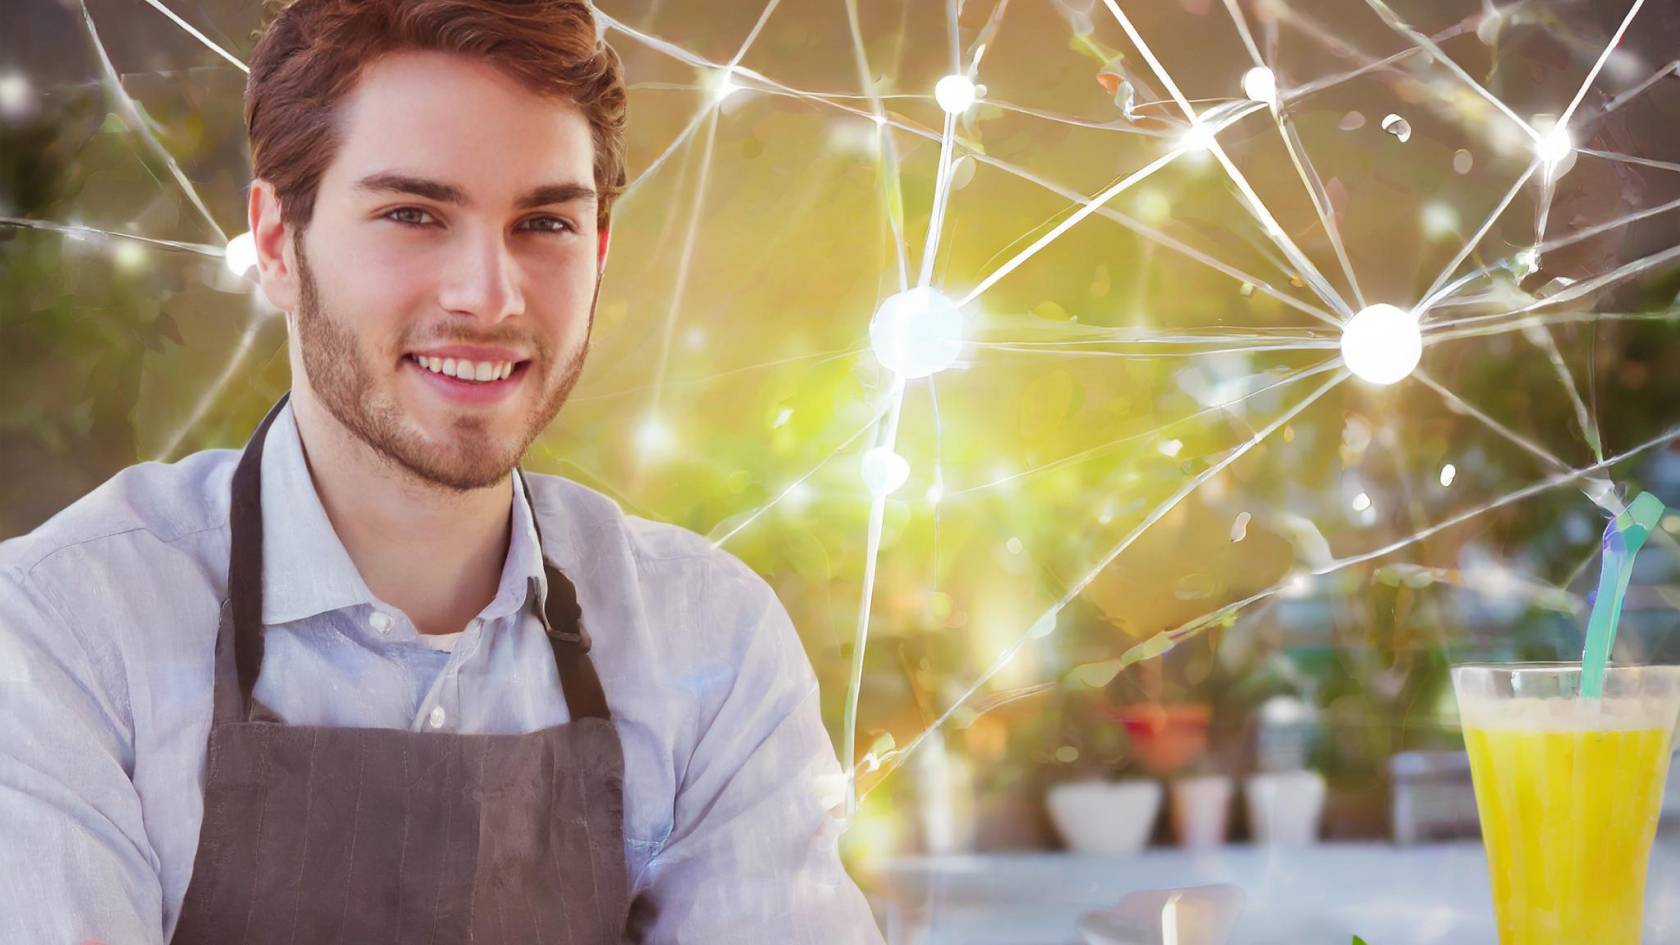 How a connected workforce revolutionizes the food industry